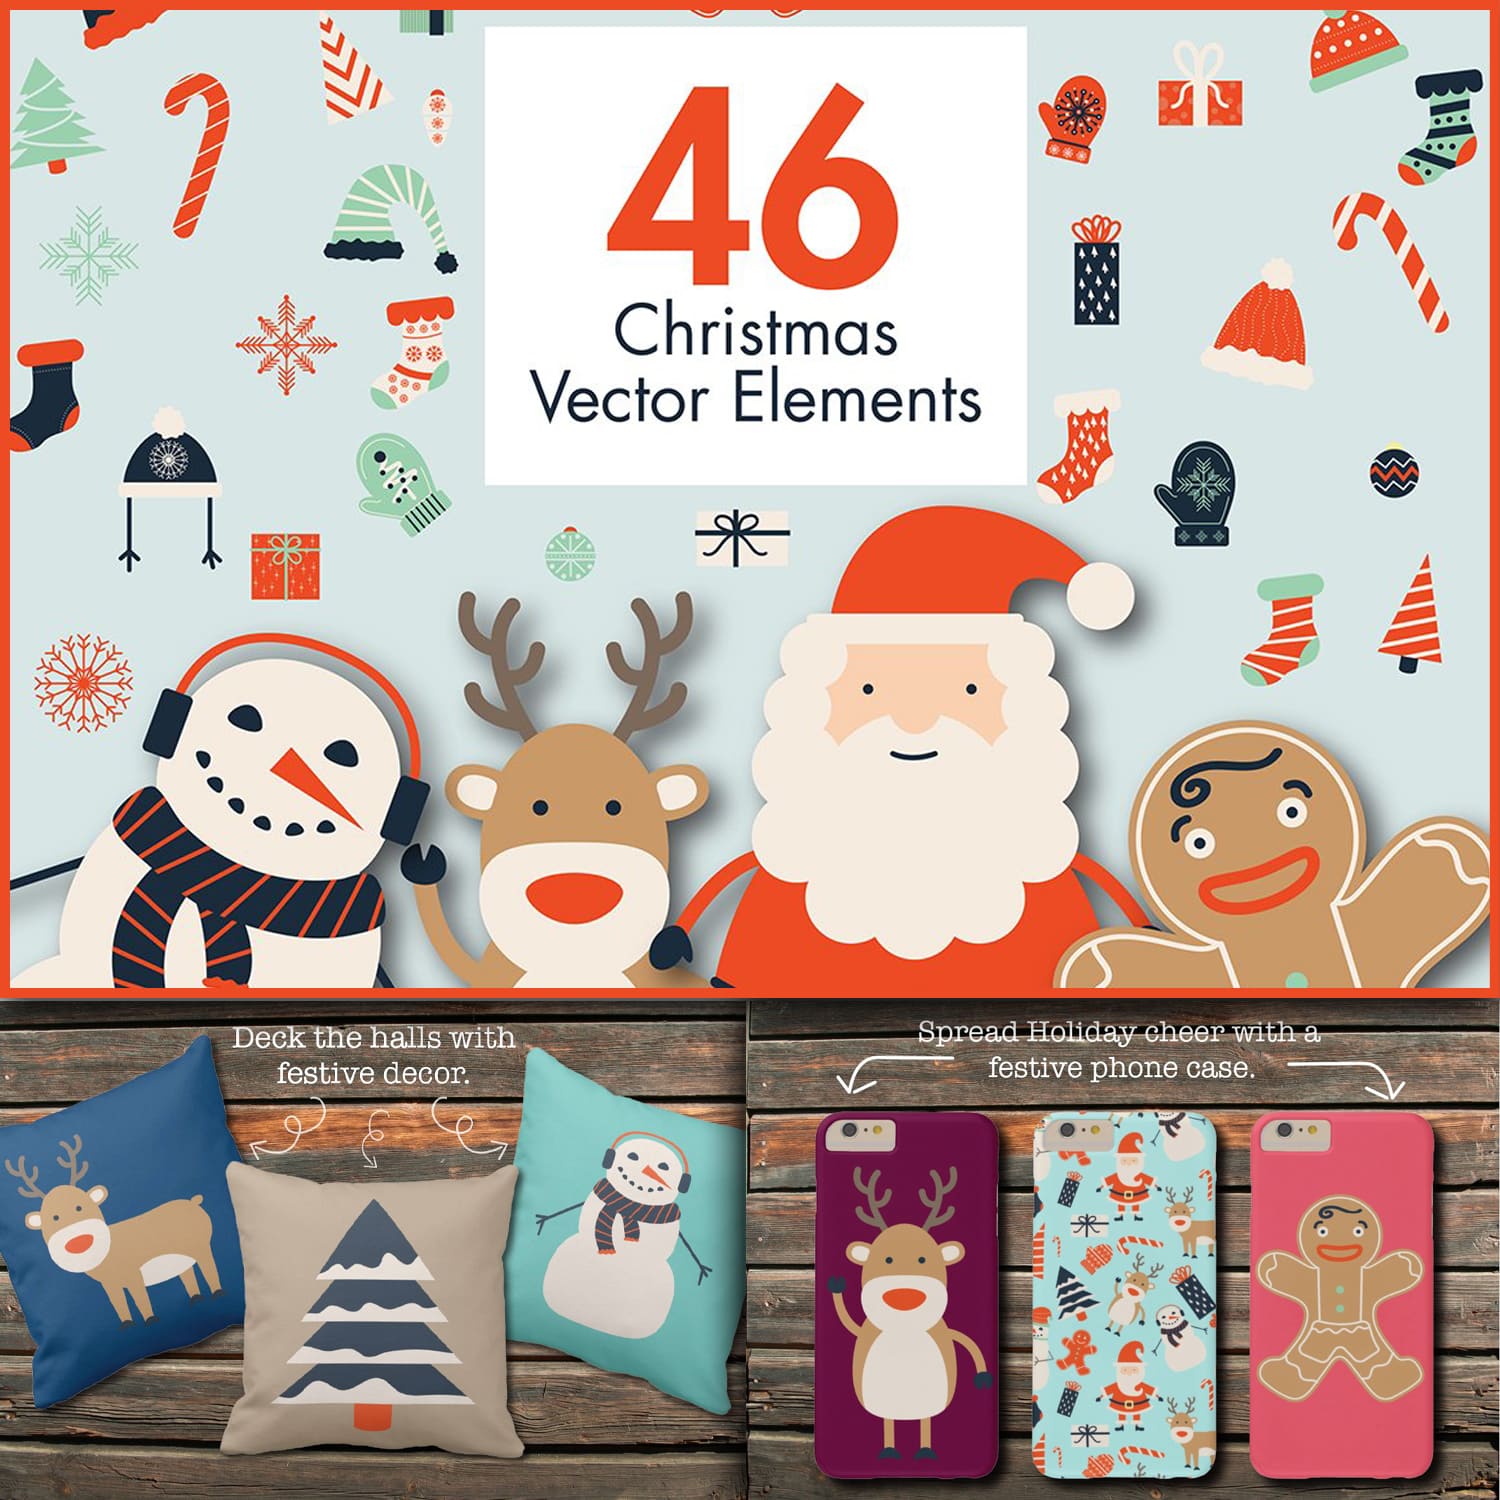 46 Christmas Elements & 3 Patterns cover.